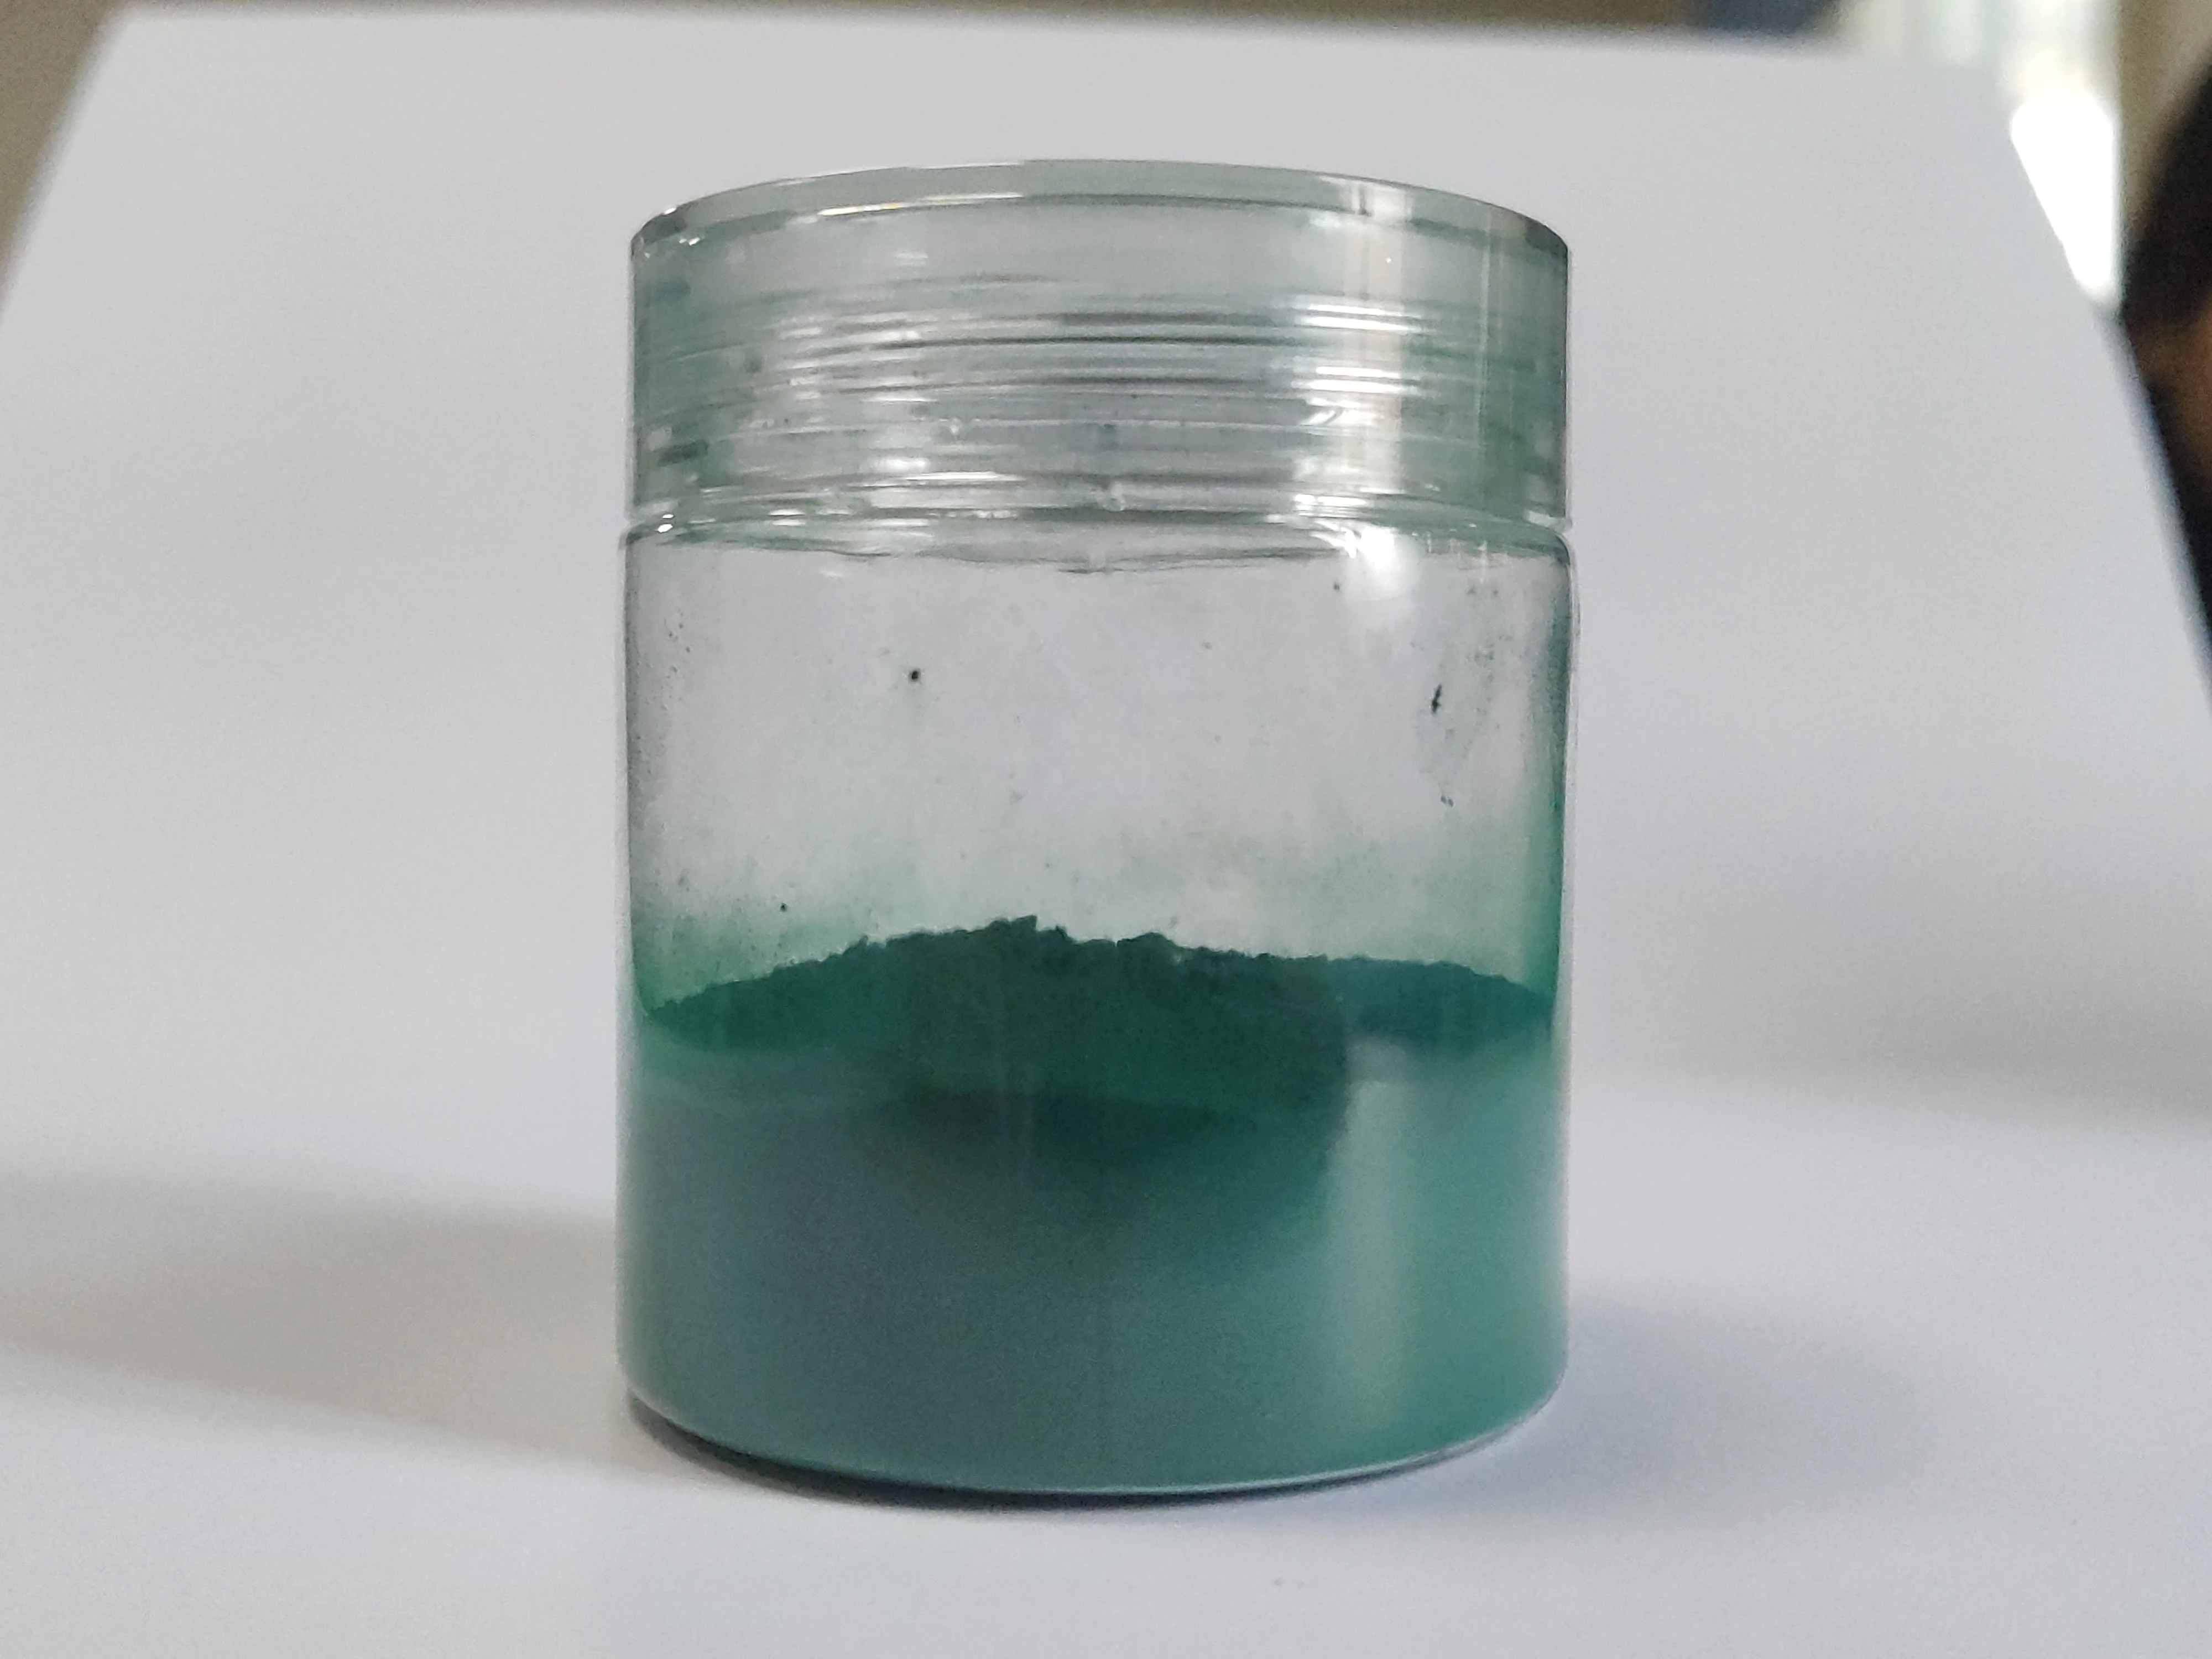 High Quality Phthalocyanine Organic Pigment Green PG7 Phthalo Green G CAS No.1328-53-6 for Plastic,Inks,Paint,Coating